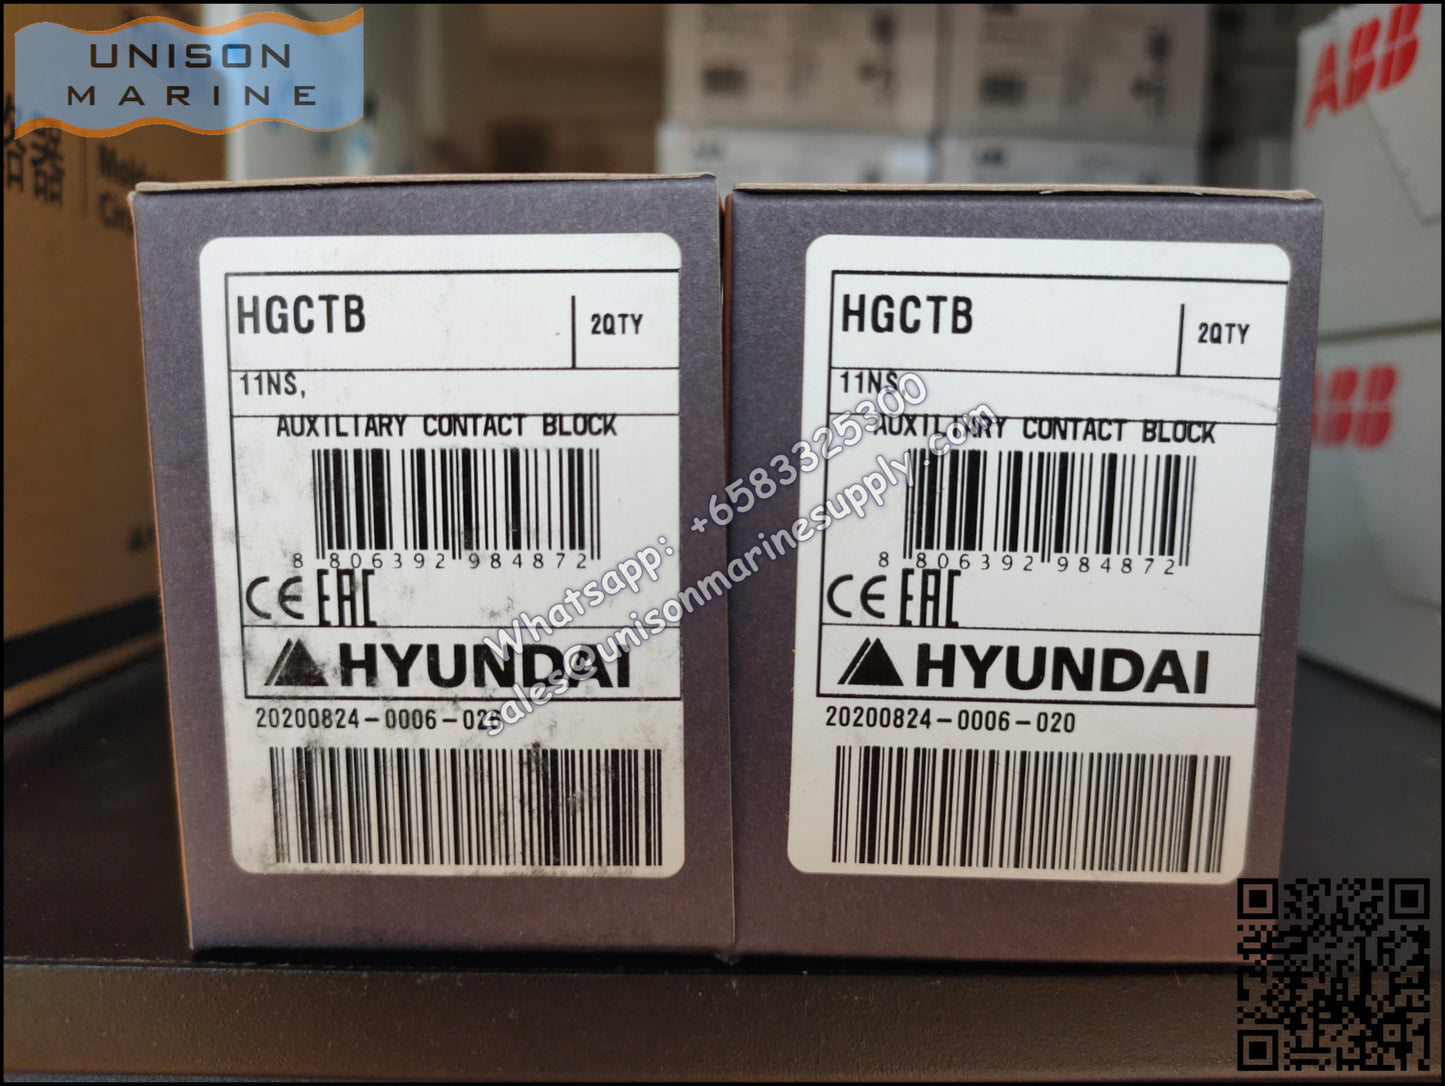 Hyundai Marine Magnetic Contactors Accessories - Auxiliary Contact Block HGCTB 11NS